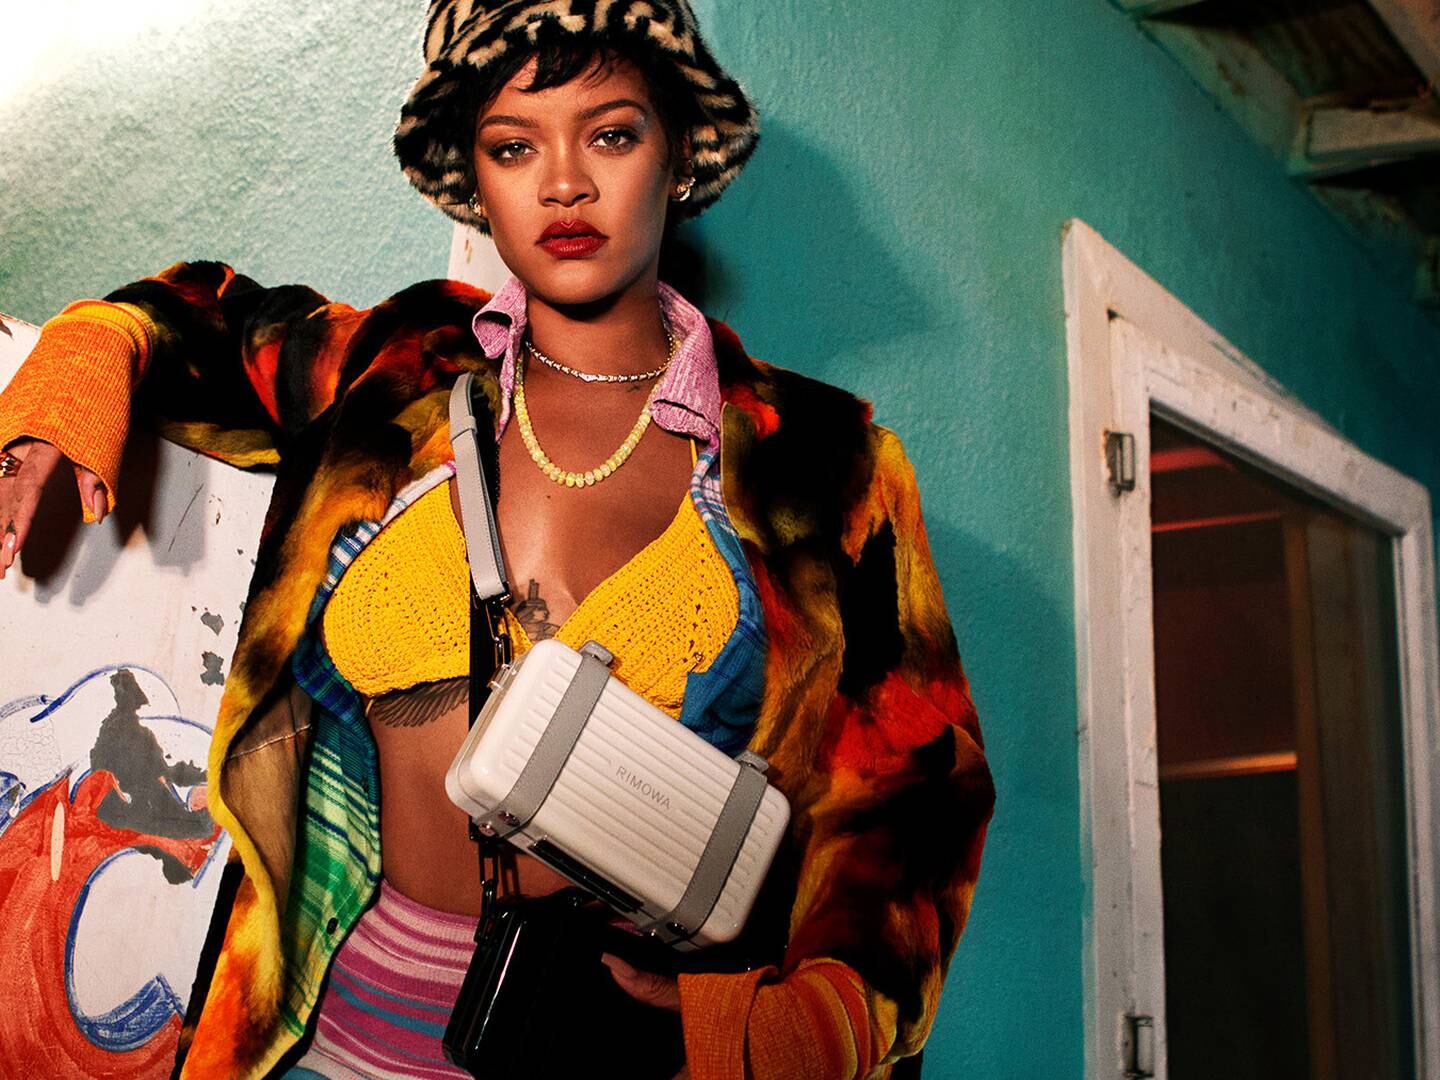 Rimowa Enlists Rihanna as the Brand Looks Beyond Suitcases